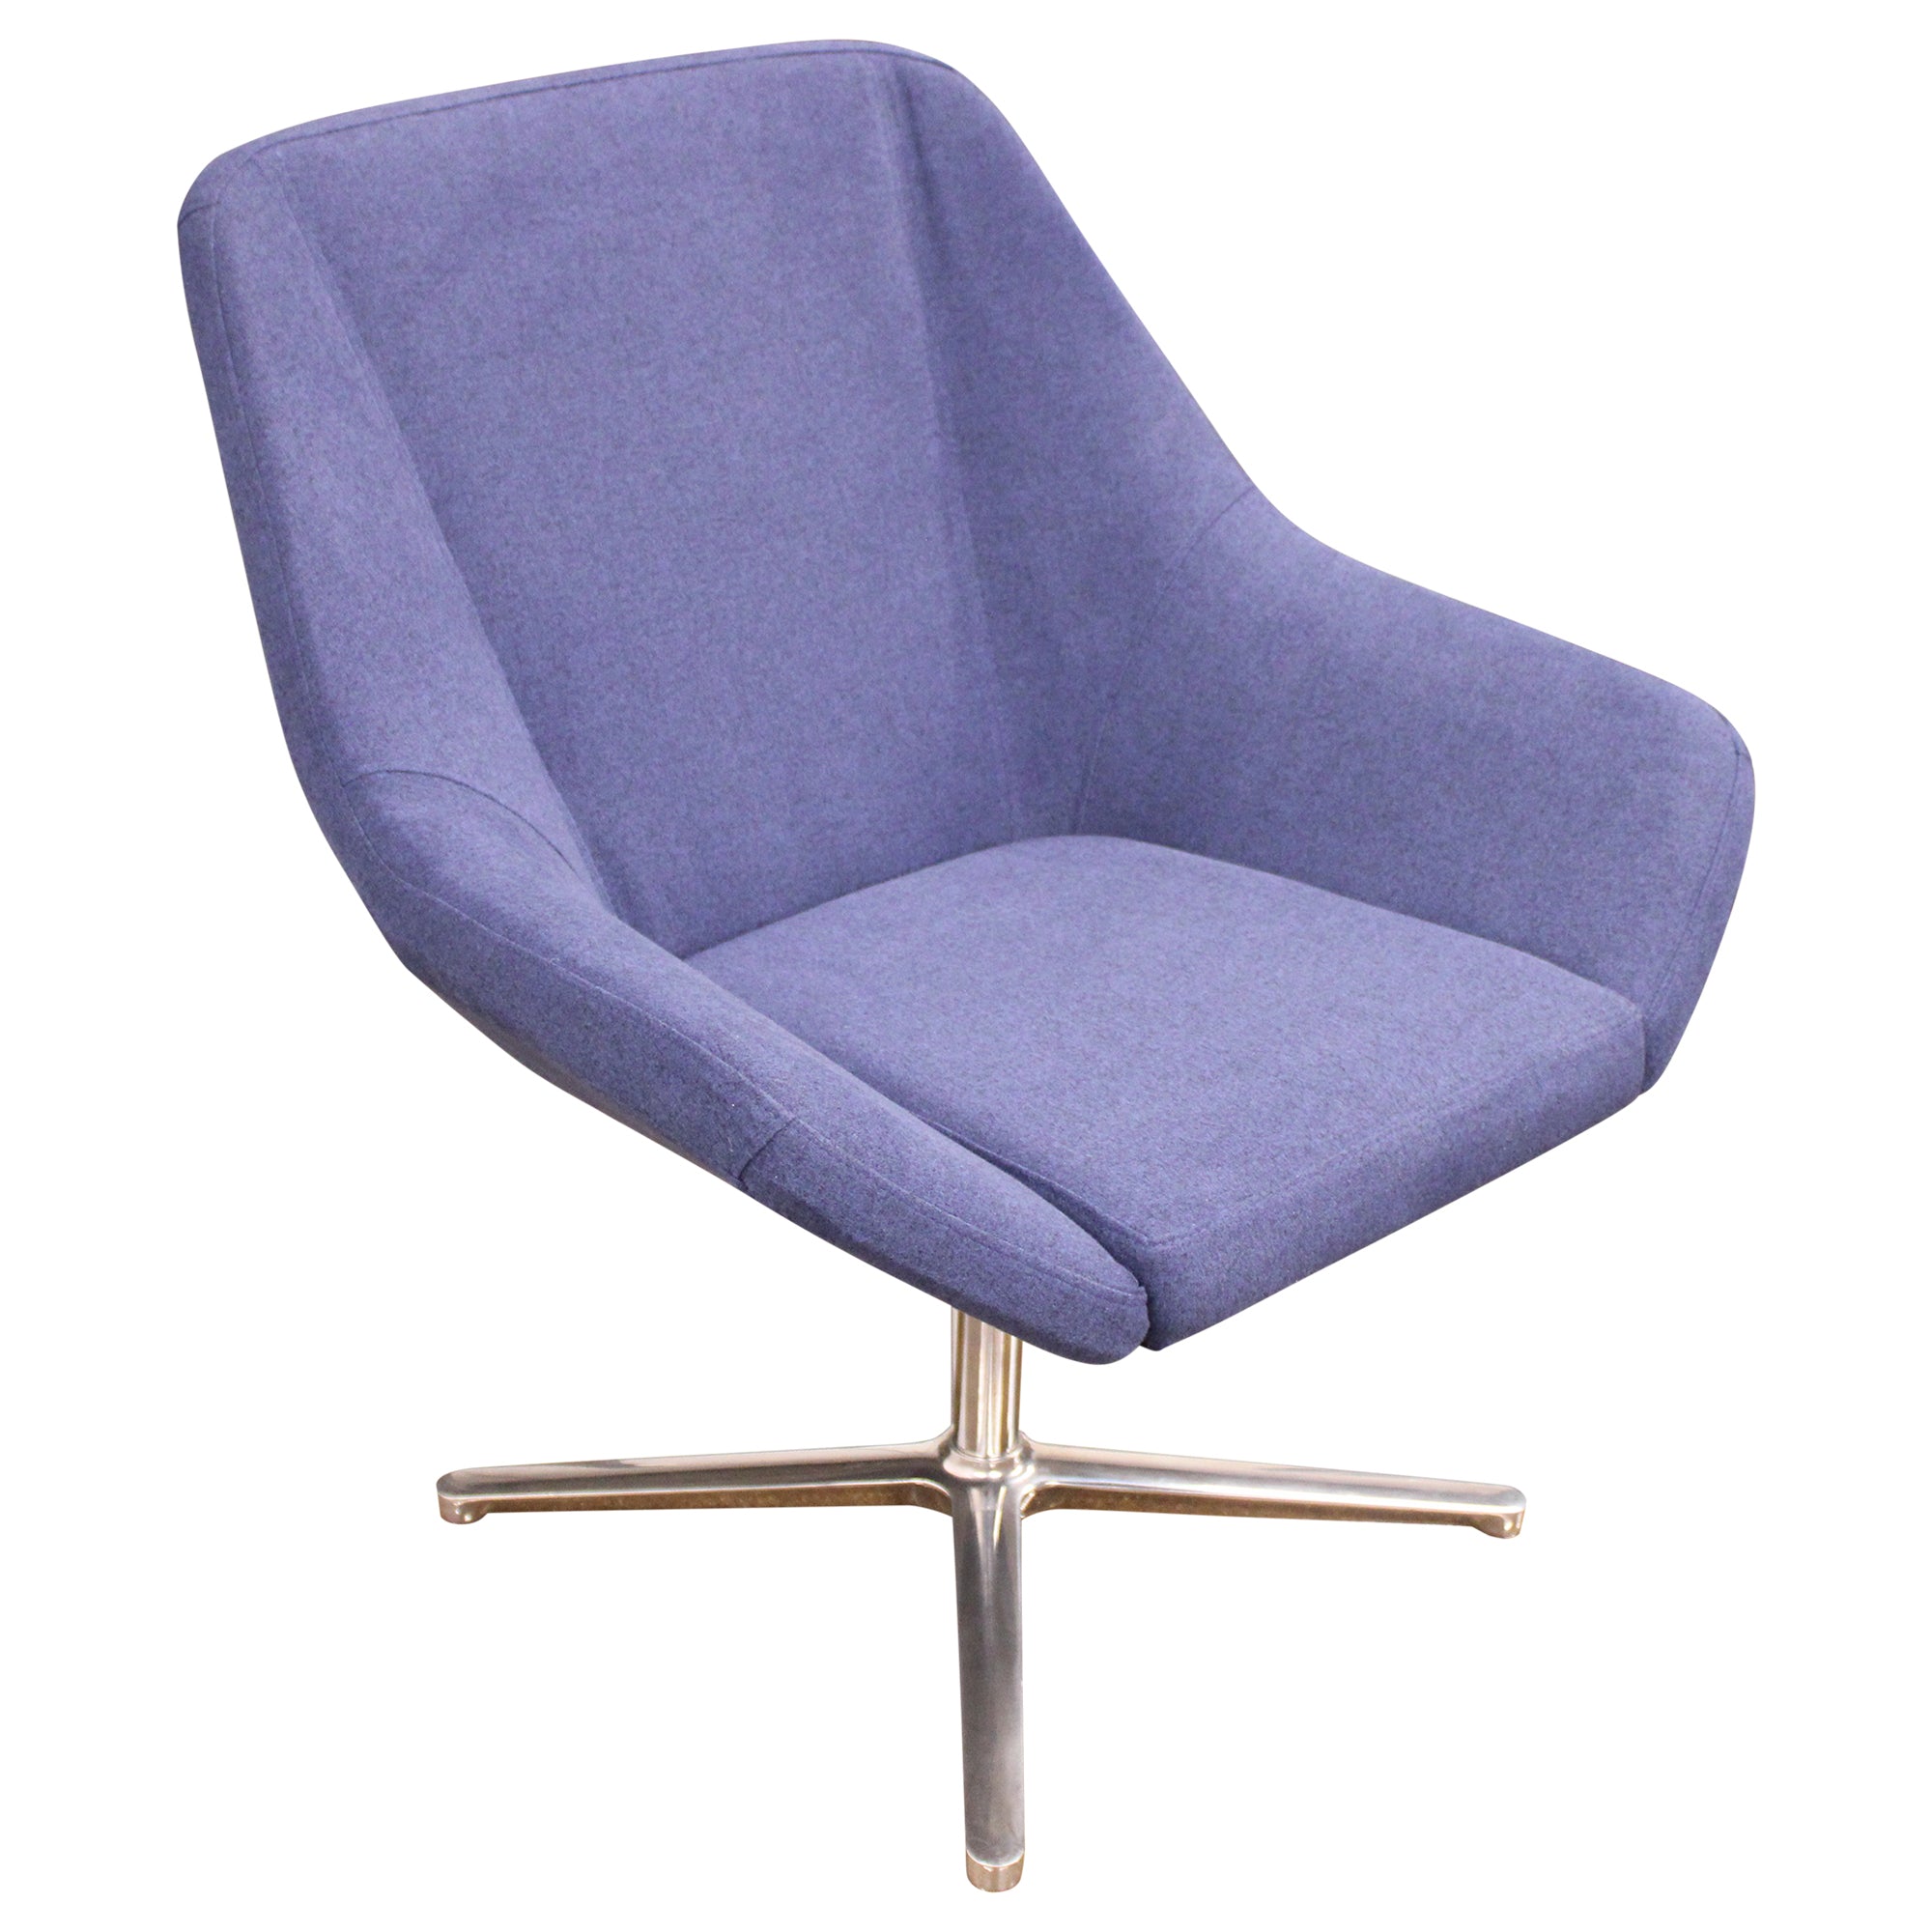 Keilhauer Cahoots Lounge Chair w/ Swivel Base, Blue - Preowned